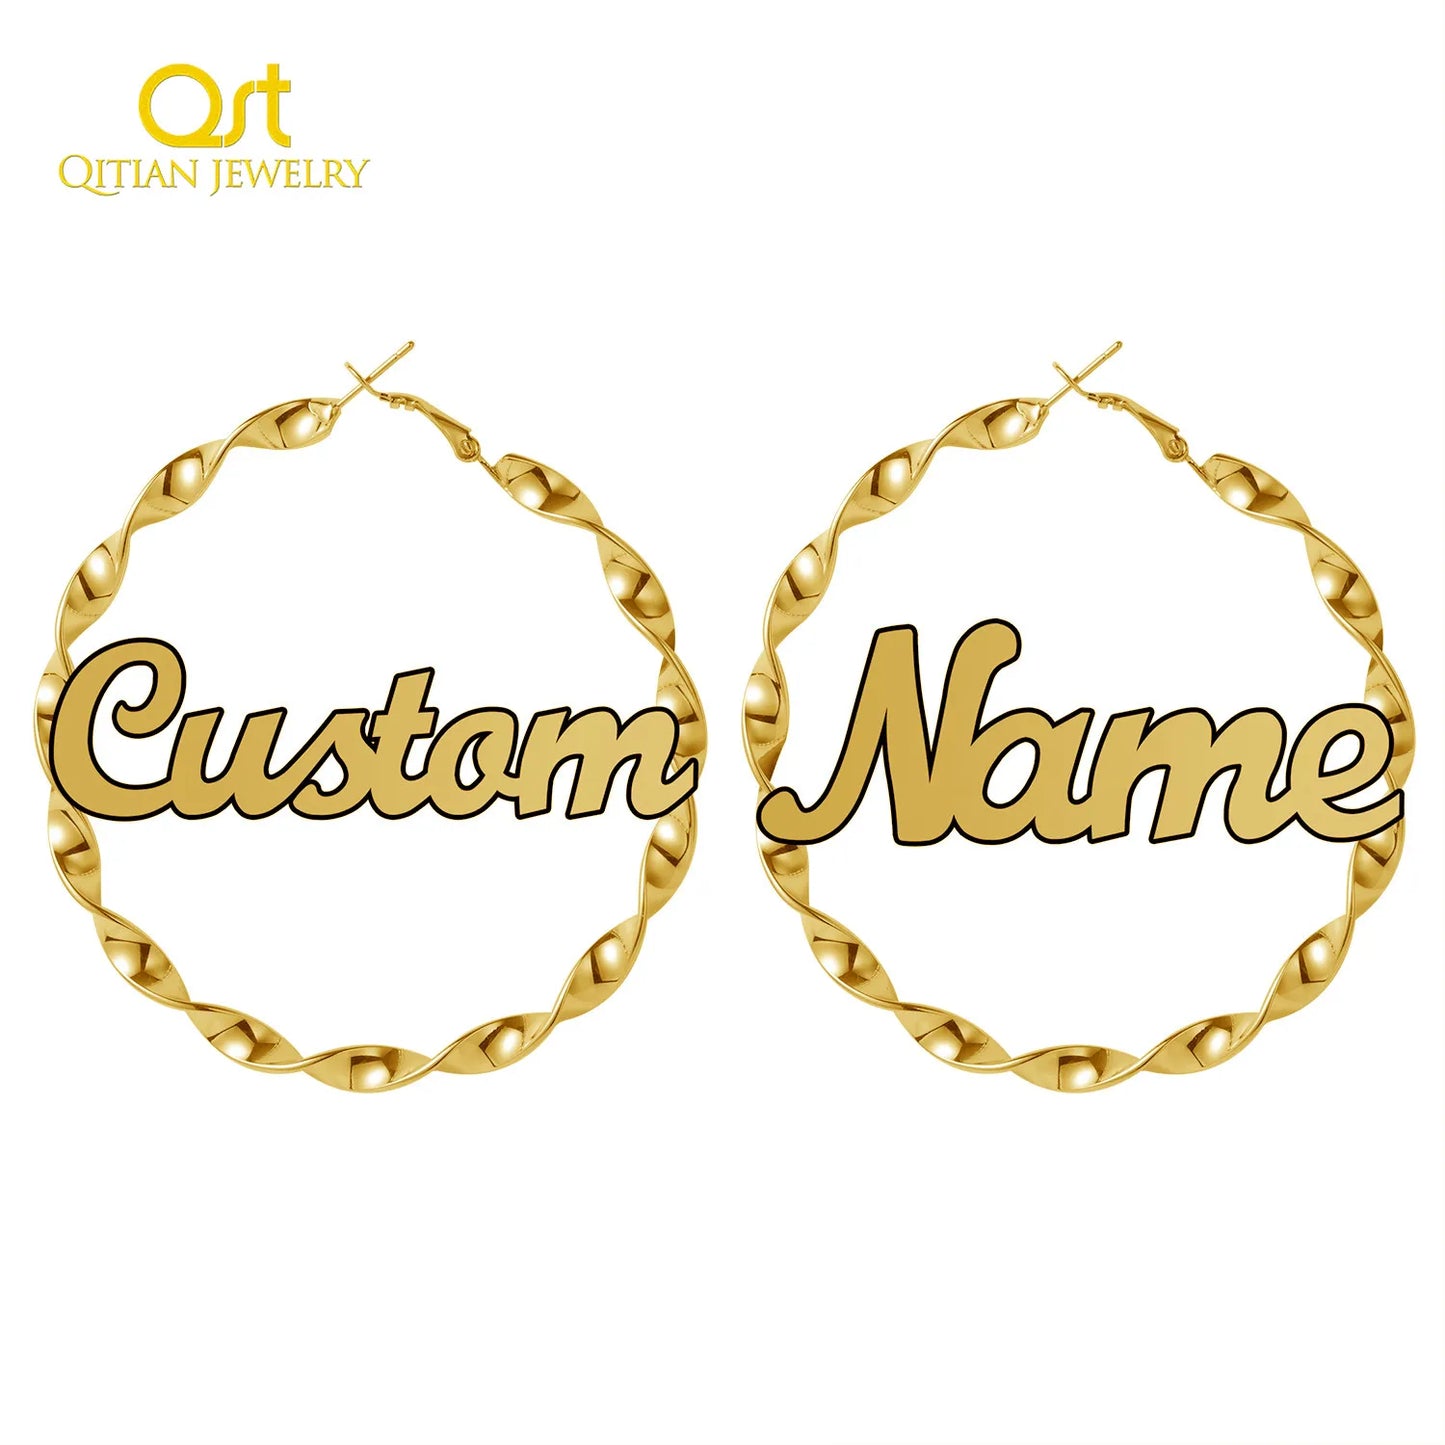 45mm-85mm Custom Hoop Earrings Customize Name Earrings Twist hoop earrings Personality Earrings With Statement Words Hiphop Sexy